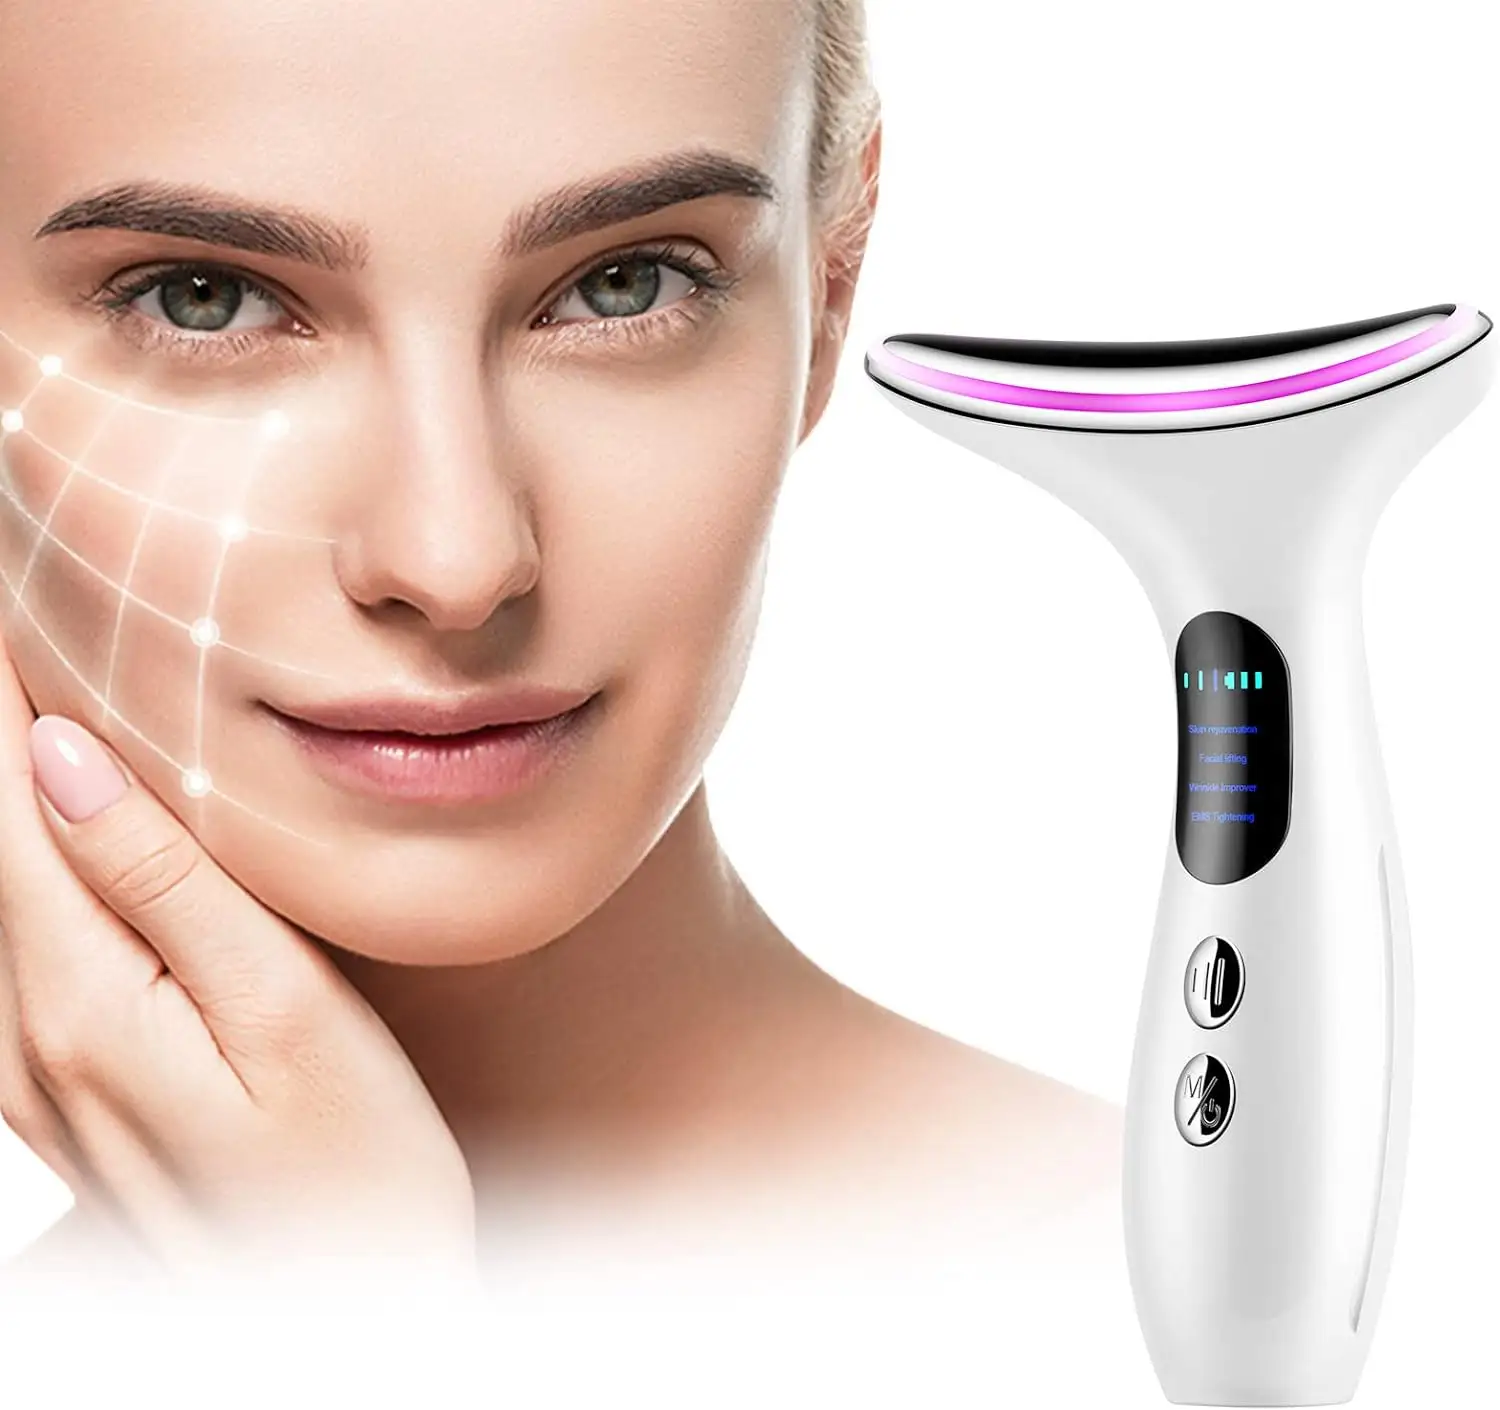 Home Beauty Products Mini Face Skin Lift Tighten Red Led Light Facial Neck Massager Neck Wrinkle Remover Ems Neck Lift Device